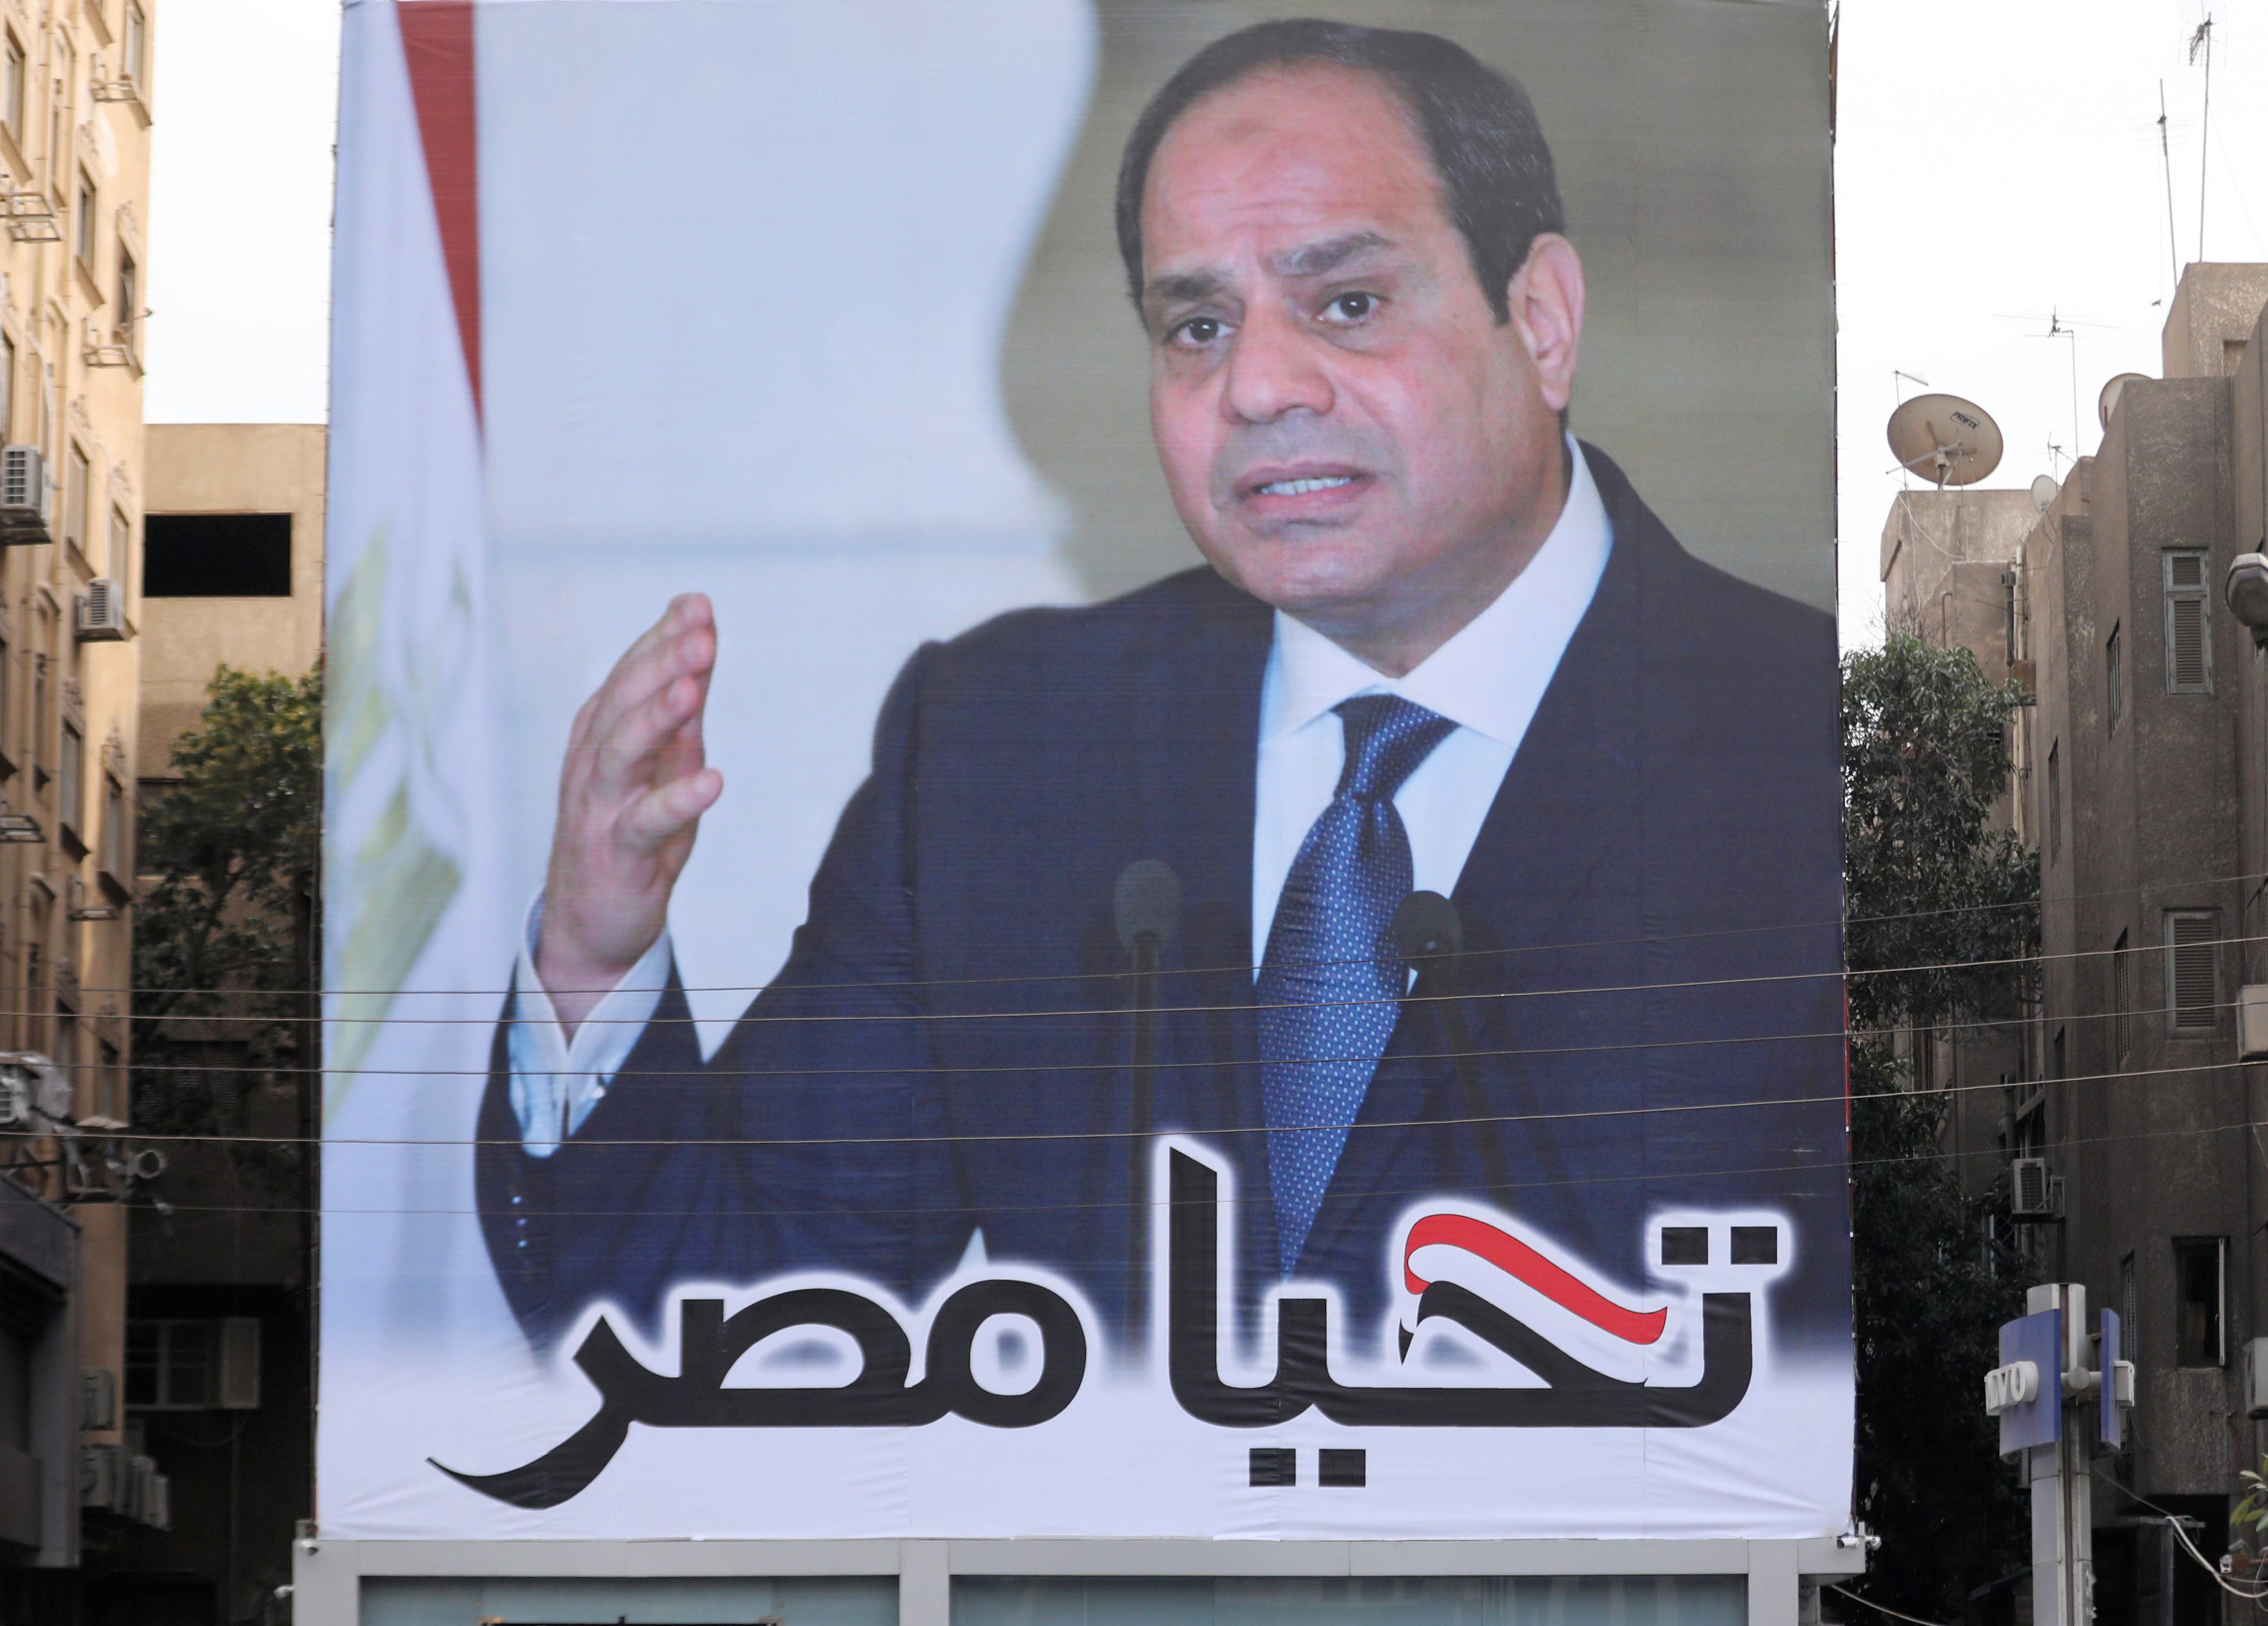 Times journalist expelled from Egypt amid media crackdown ahead of upcoming elections